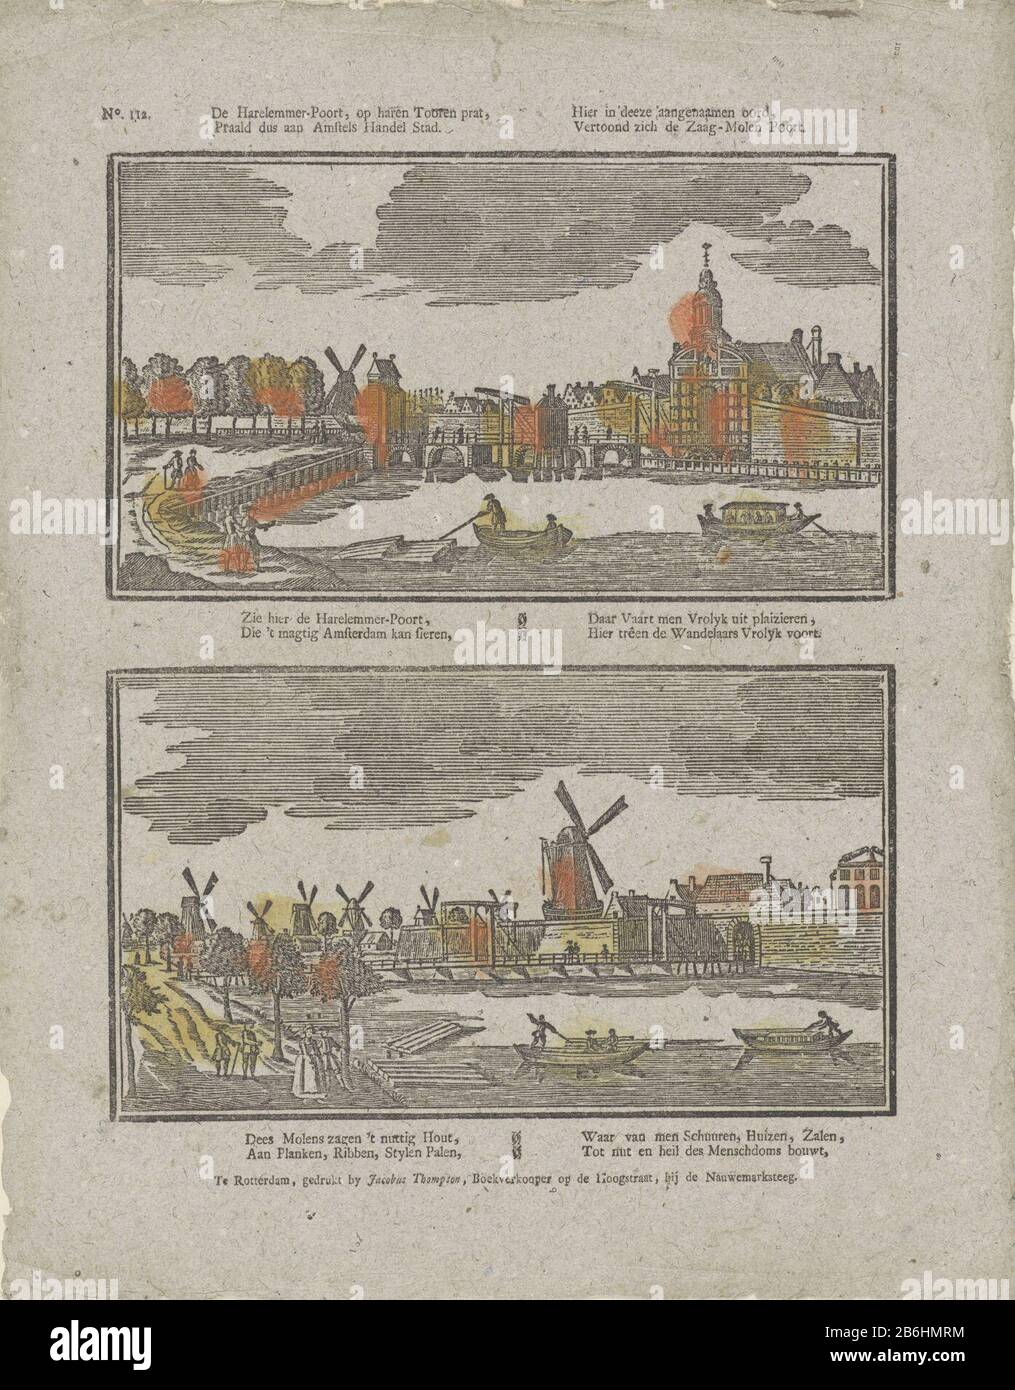 The Hare-port Lemmer, opharen Tooren pride, so to Praald Amstels trading center here in 'thefe' event names called resort, Screened aich the saw-mill gate (title object) Sheet two representations of faces in Amsterdam. Above: view of the Haarlemmerpoort. Below: a view of the saw Molenpoort. Under each picture a four-line fresh in two columns. Numbered top left: No. 112. Manufacturer : publisher: James Thompson (indicated on object) print maker: anonymous location manufacture: publisher: Rotterdam Print Author: The Netherlands Date: 1791 - 1812 Physical characteristics: wood block colored in ye Stock Photo